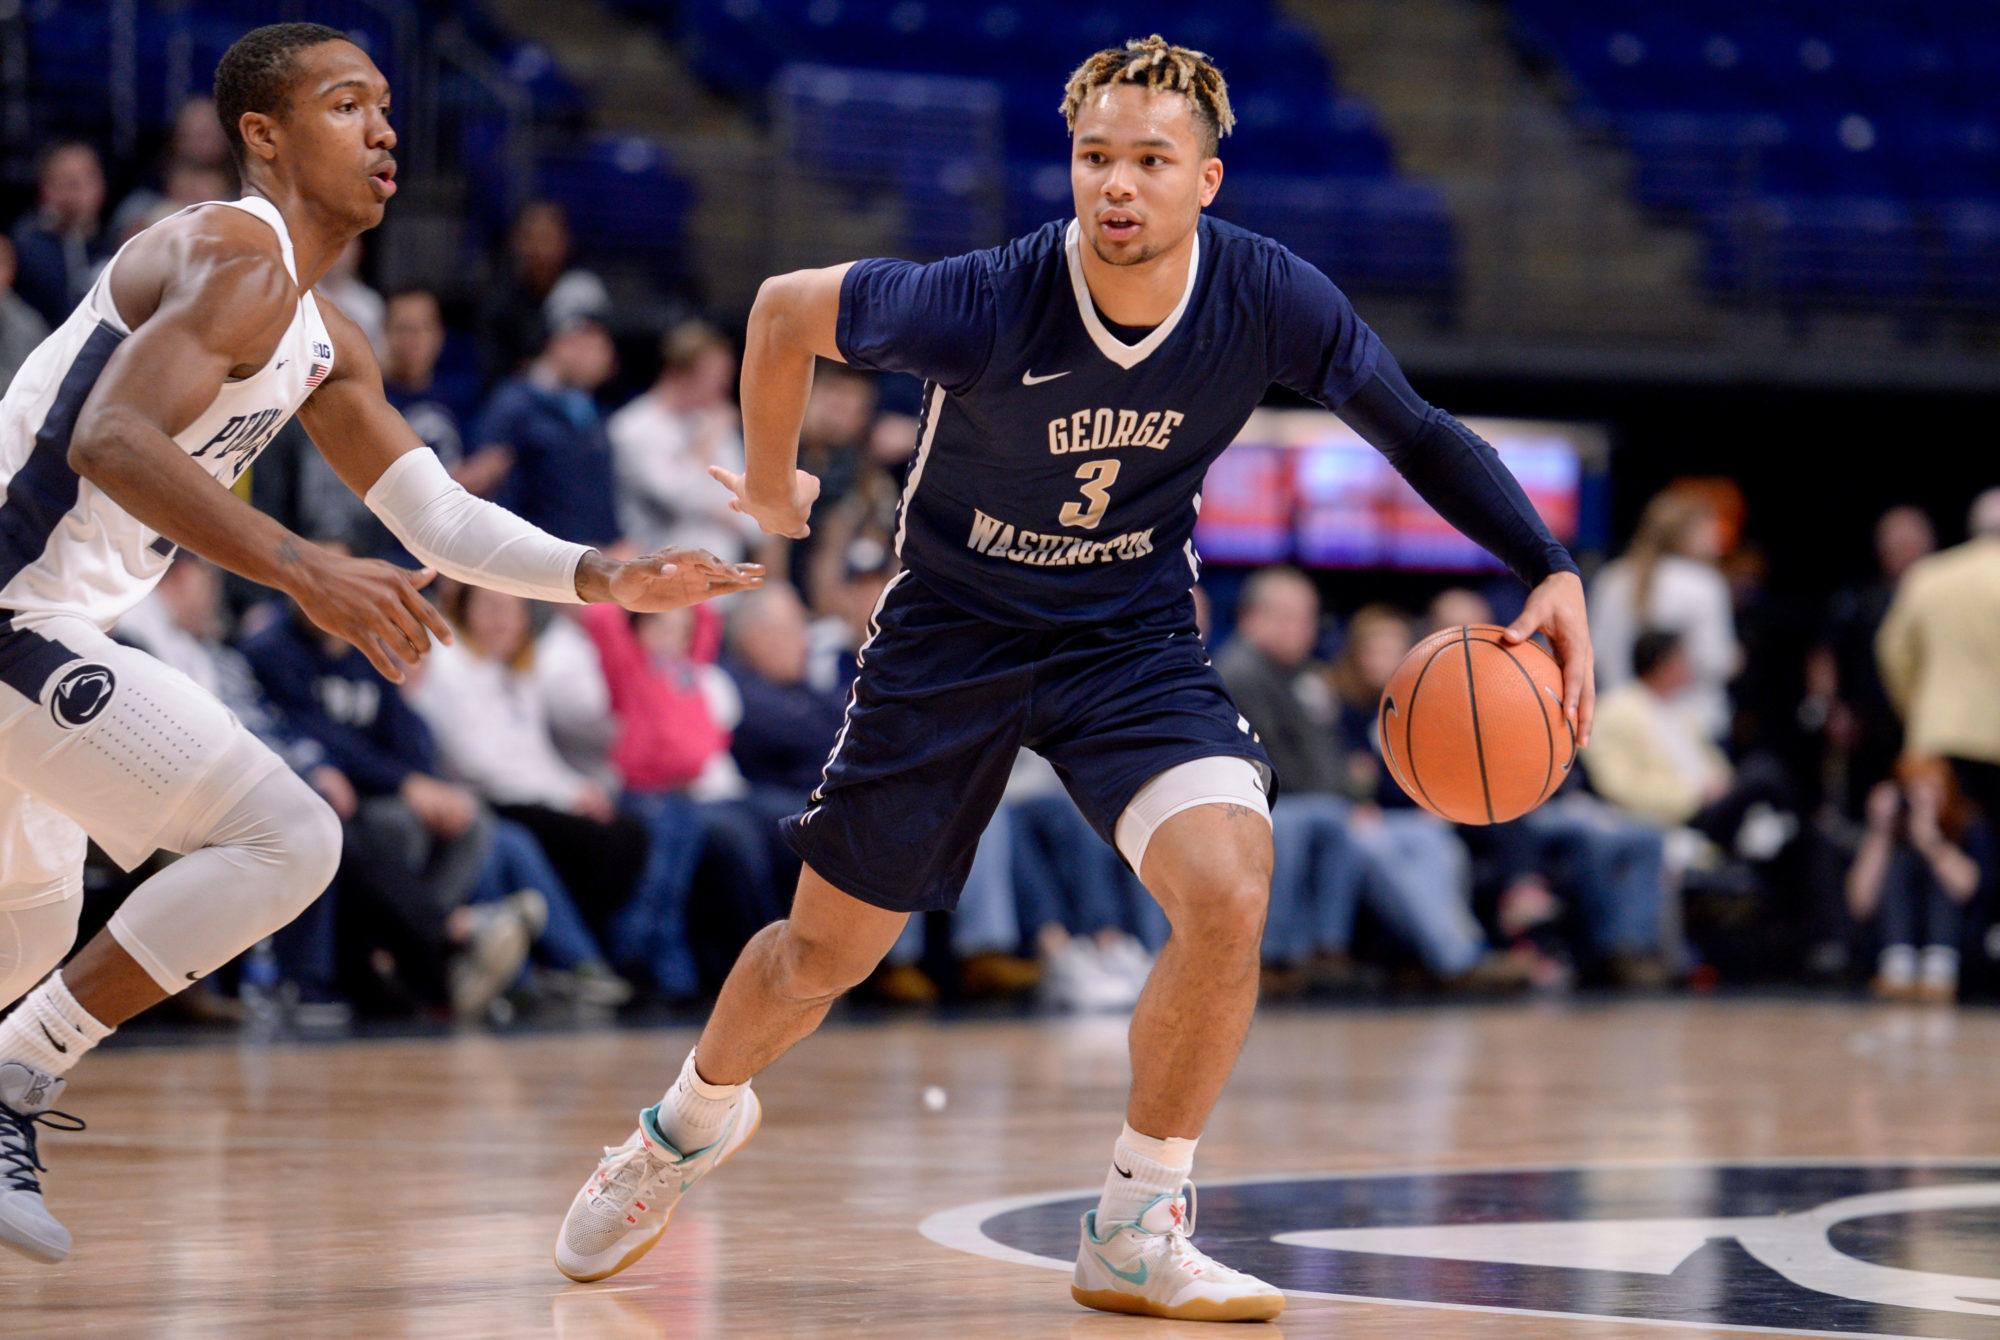 Penn State overpowers men’s basketball in decisive first half The GW